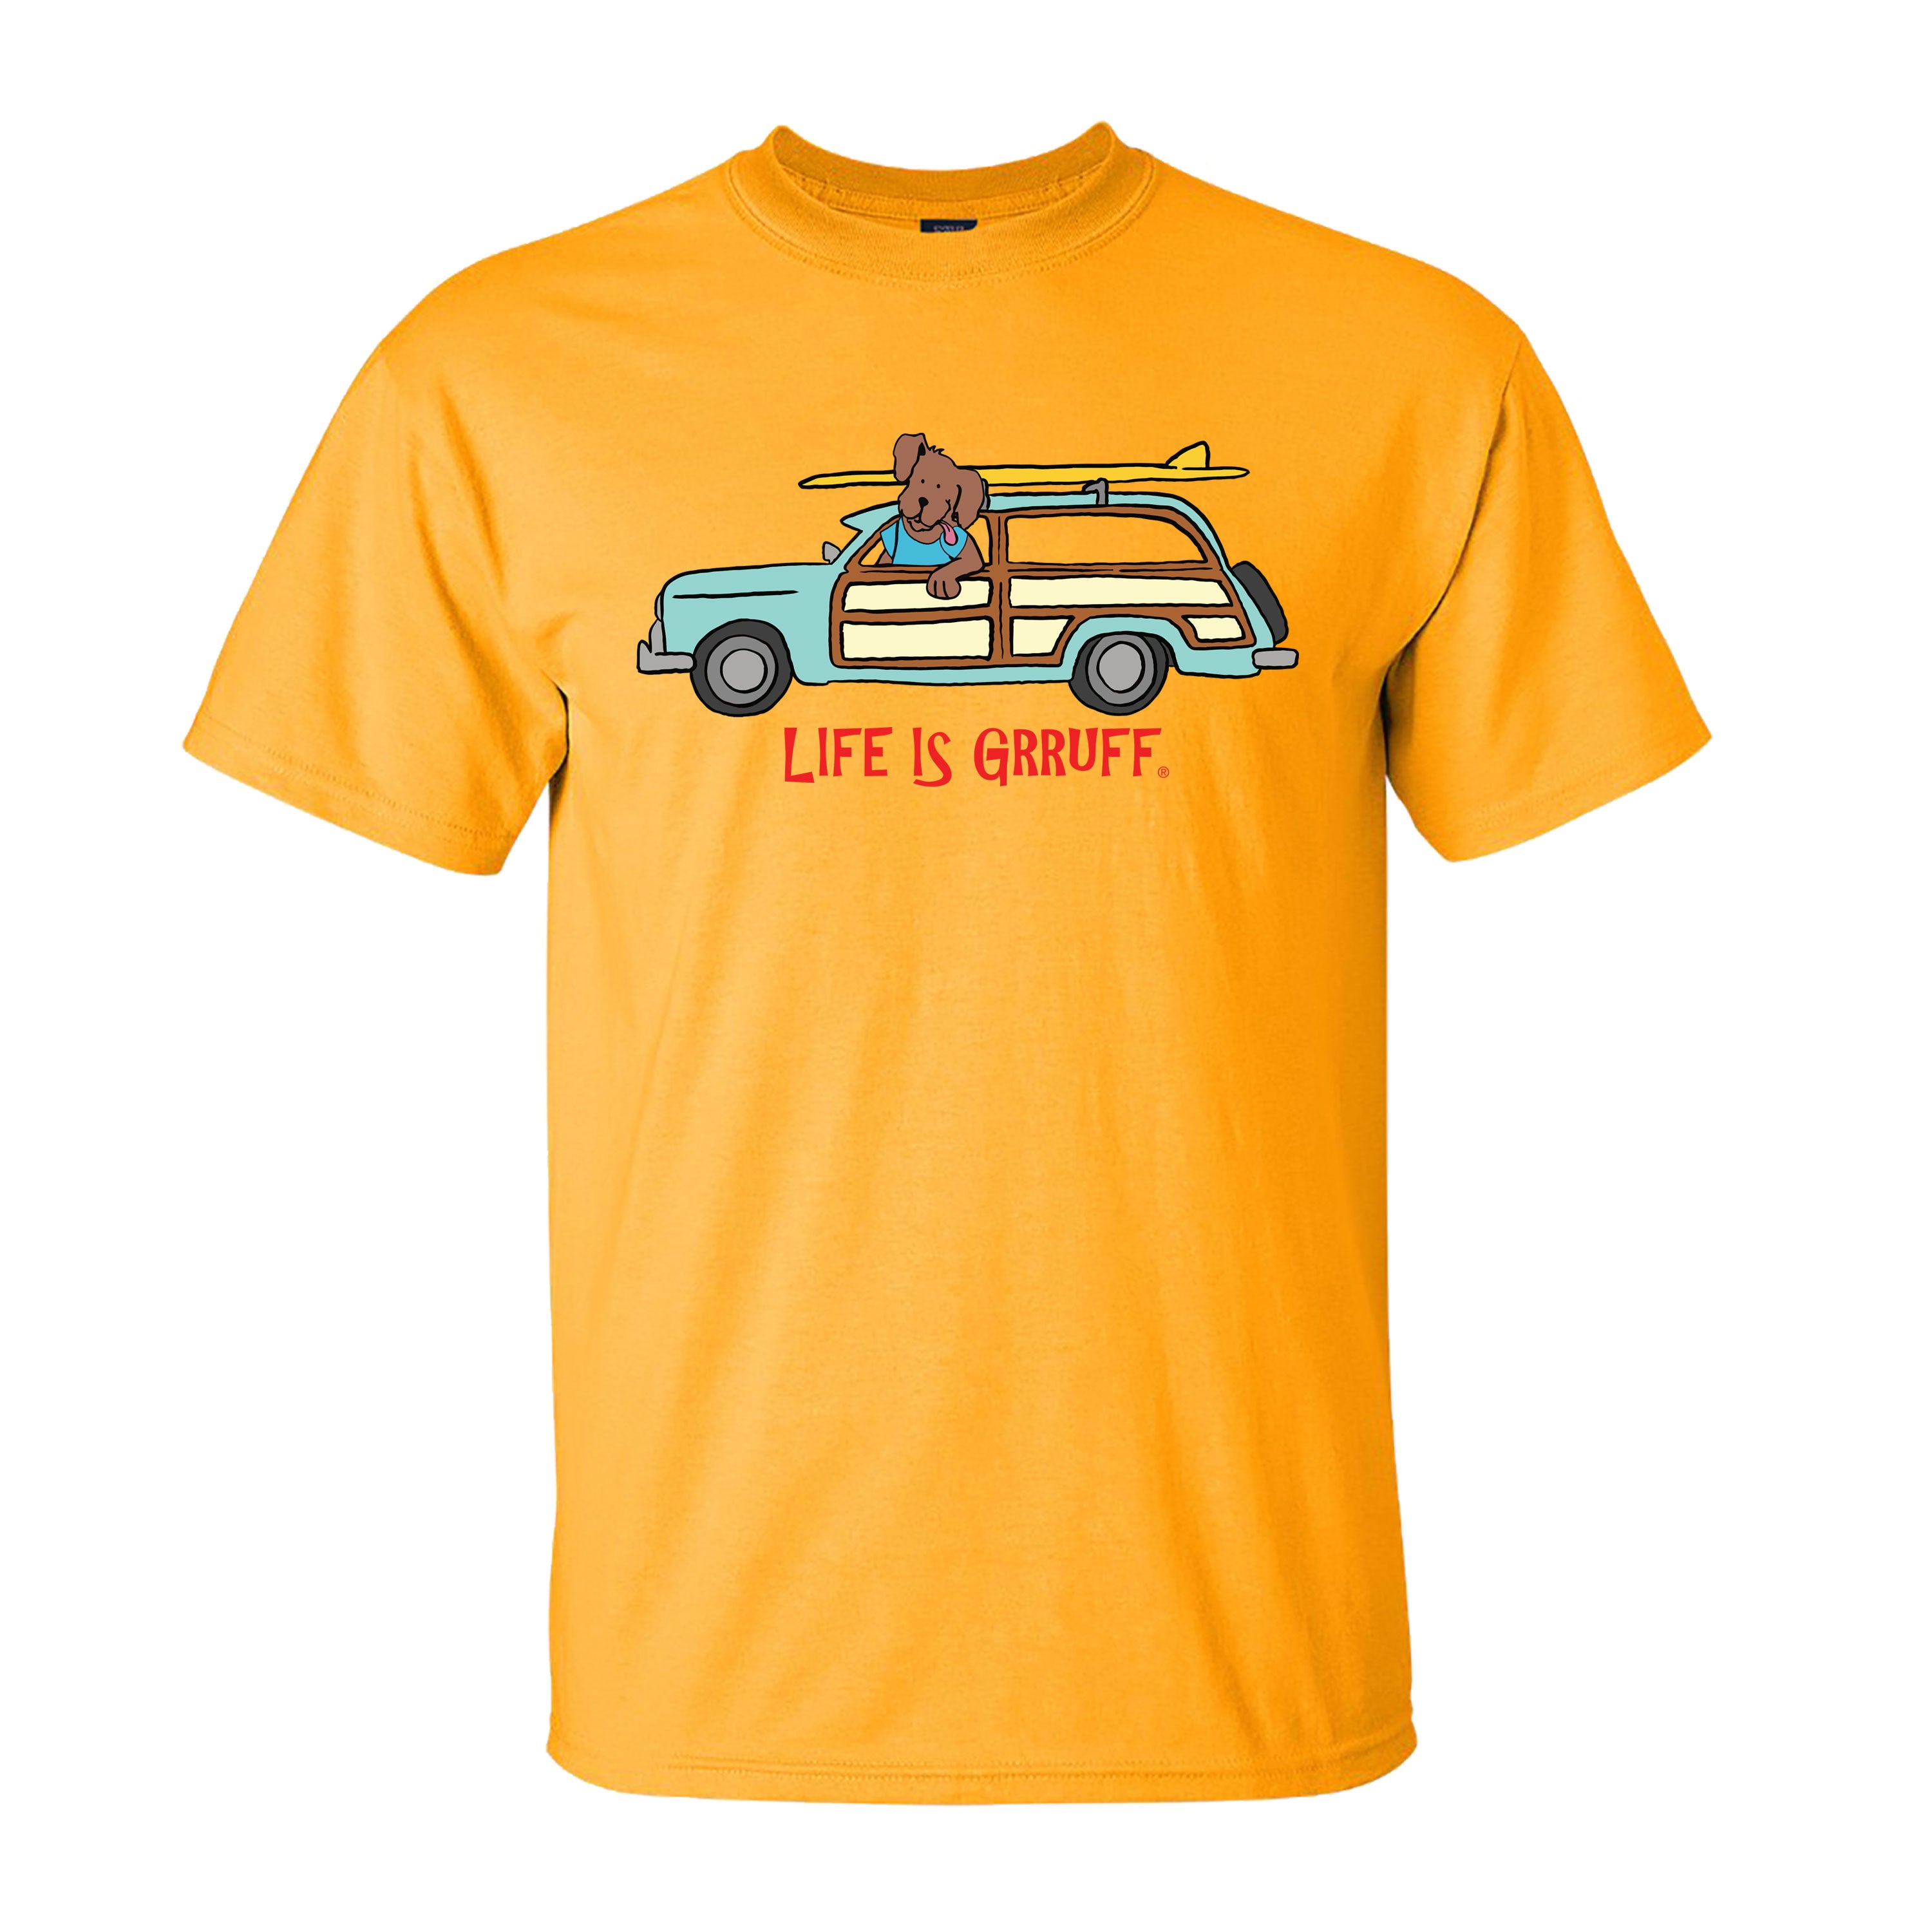 Classic fit tee/athletic gold with woody